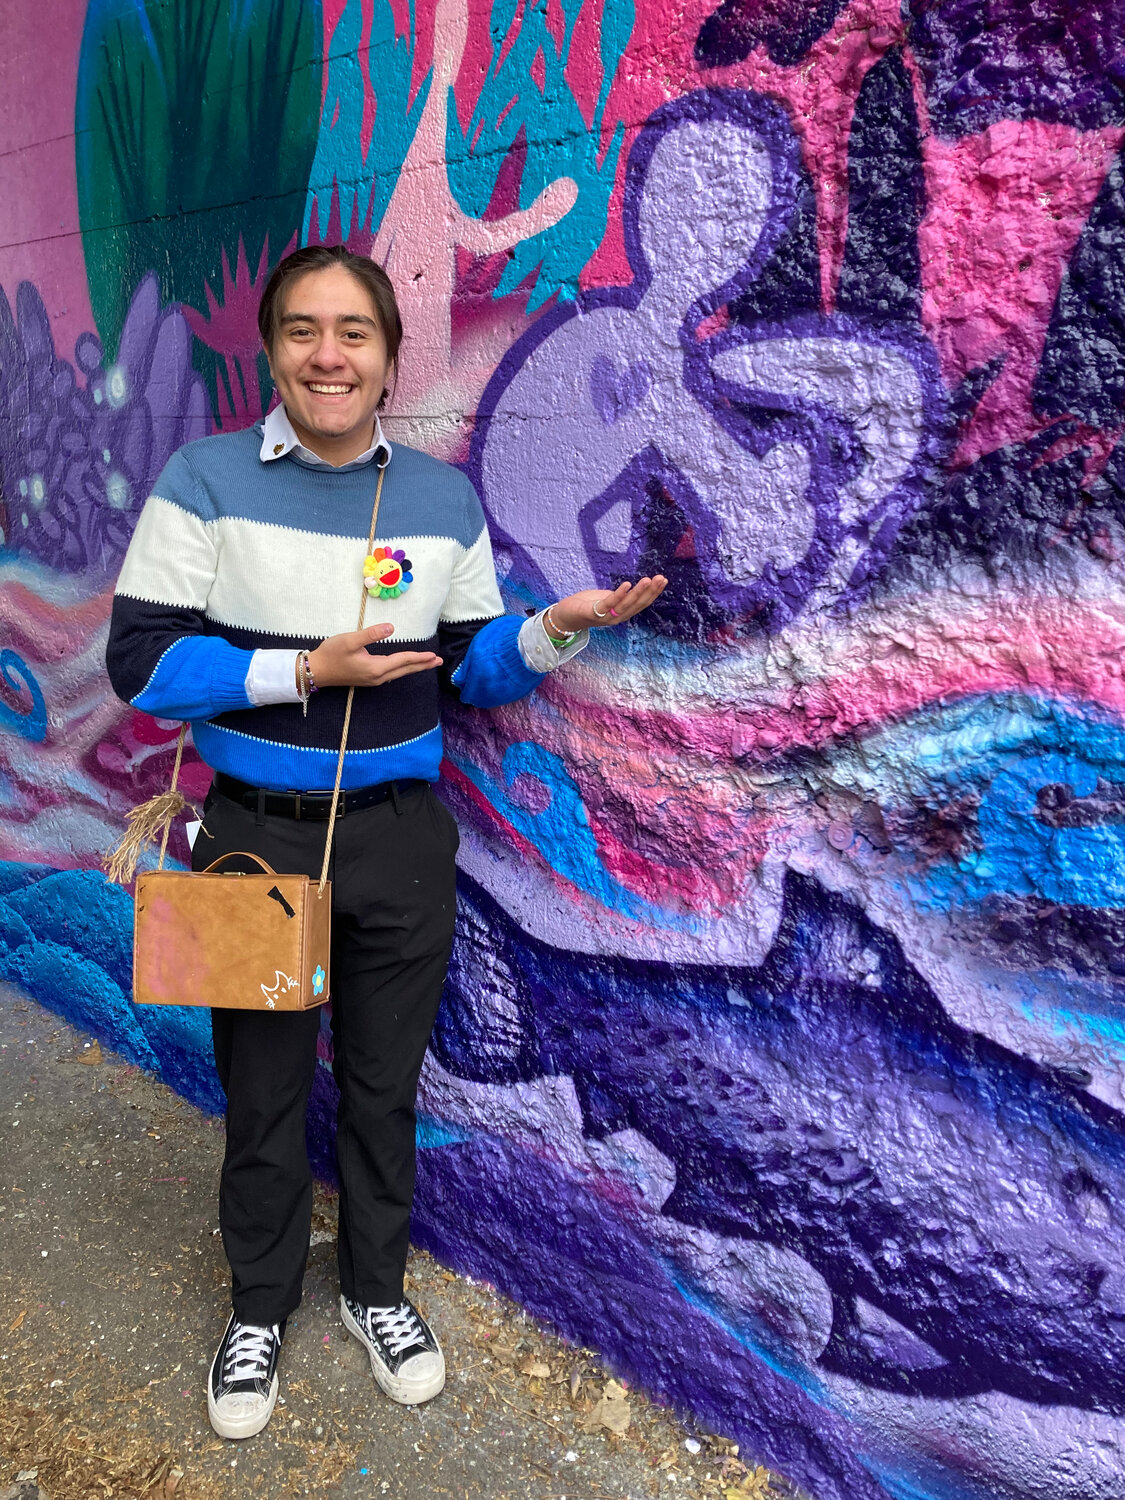 "If you look at it closely you can see a little blue guy holding a SIGN not a hammer. Nonetheless, I first sketched that little dude just a few years ago and to see it now on a mural it means so much more than just paint," said Hego Centeno, a sophmore at Hiawatha Collegiate High School (HCHS). "You might also be wondering what the little dude means or is called. I called him “The kid” and to me he represents the youth in someone. The strength, bravery, hunger, pride and more in someone. It might mean something else to you who knows. I don't think this mural needs anything else other than the people's ideas and thoughts to be heard and thought of. May this mural bring peace and harmony between two communities and really show the meaning behind what we call home."